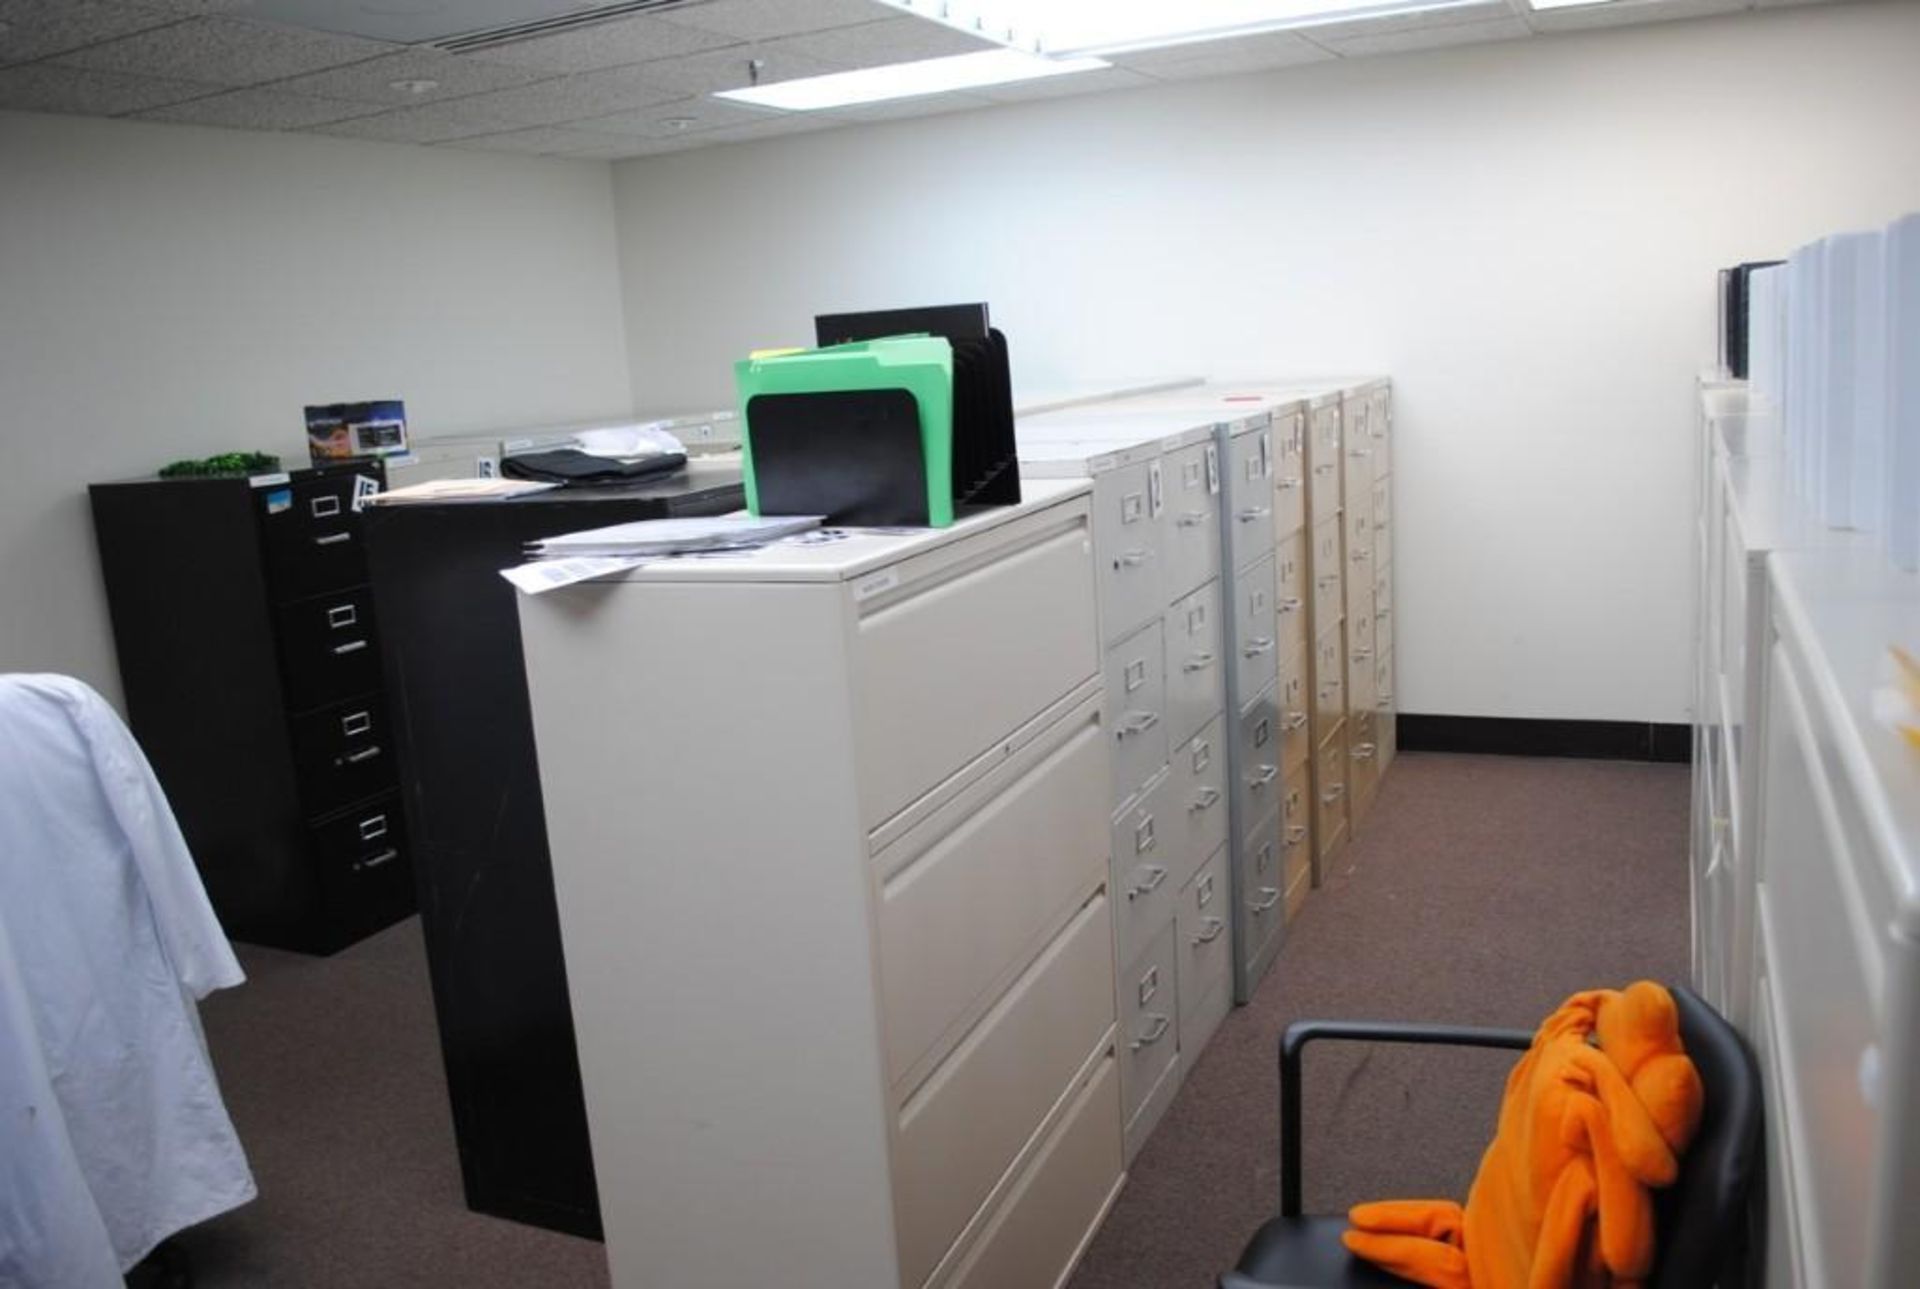 Office Furniture in storage room. - Image 29 of 37